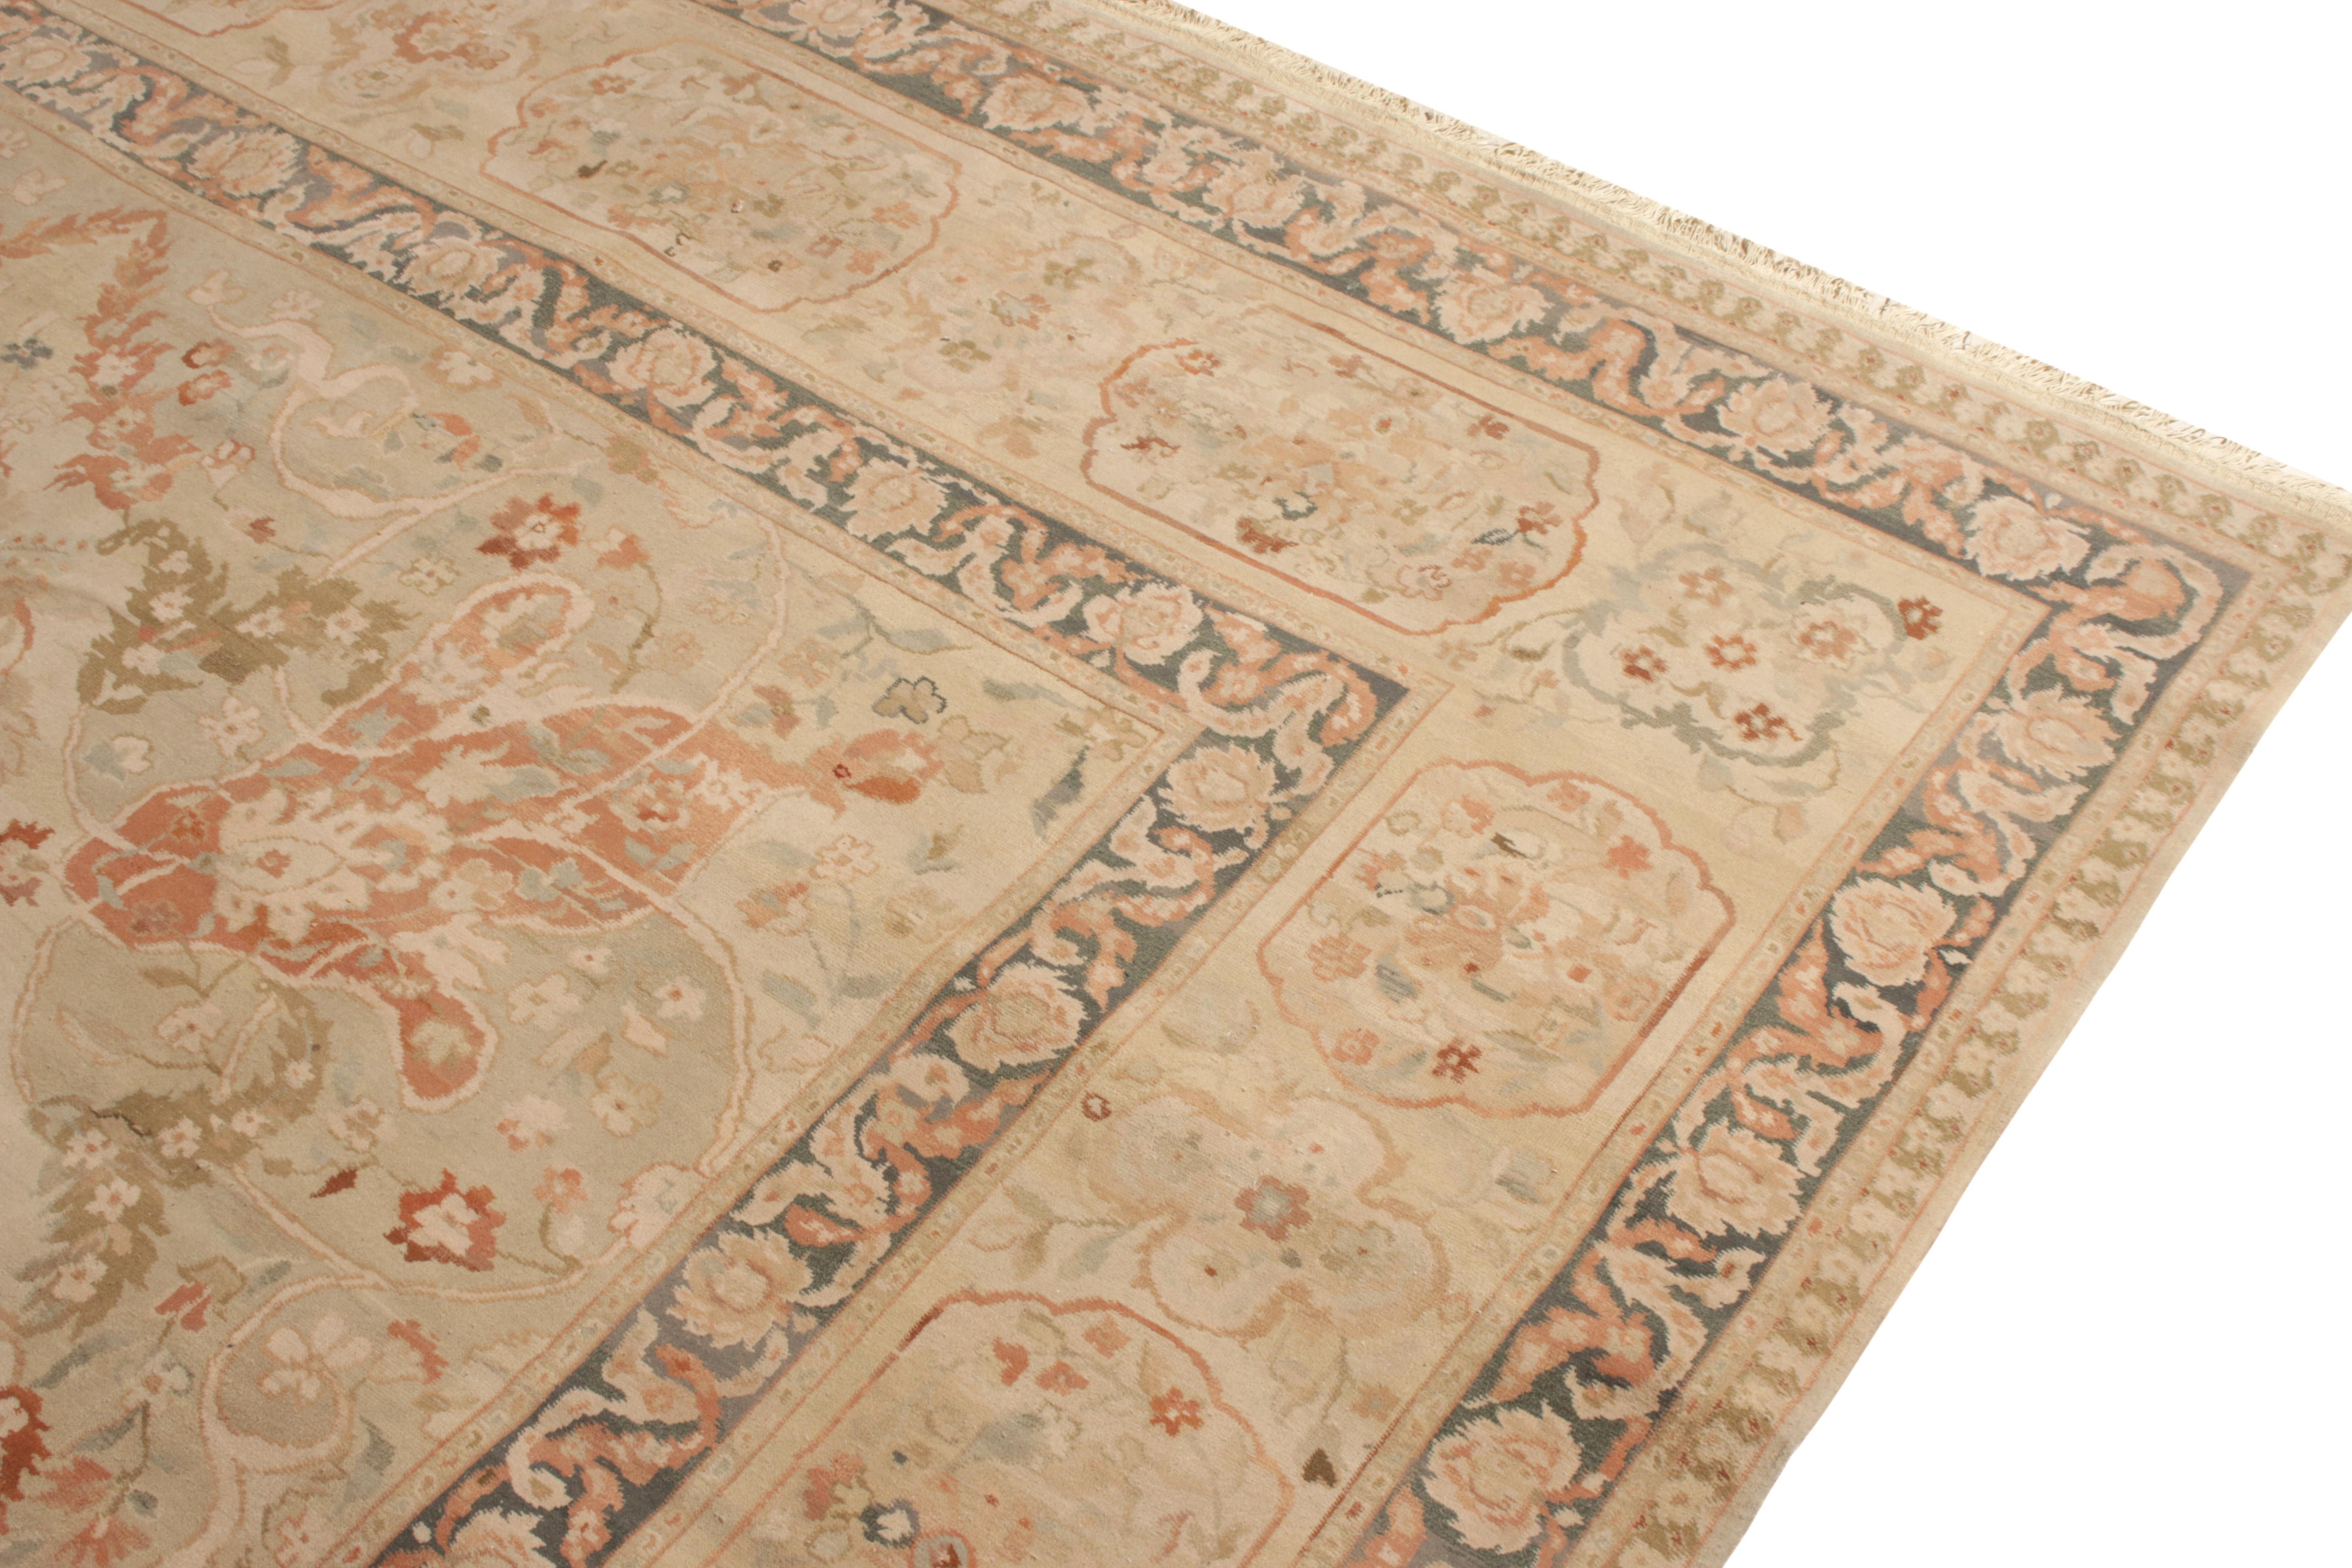 Hand-Knotted Rug & Kilim’s Persian Tabriz Style Rug in Beige-Brown, Pink Floral Pattern For Sale